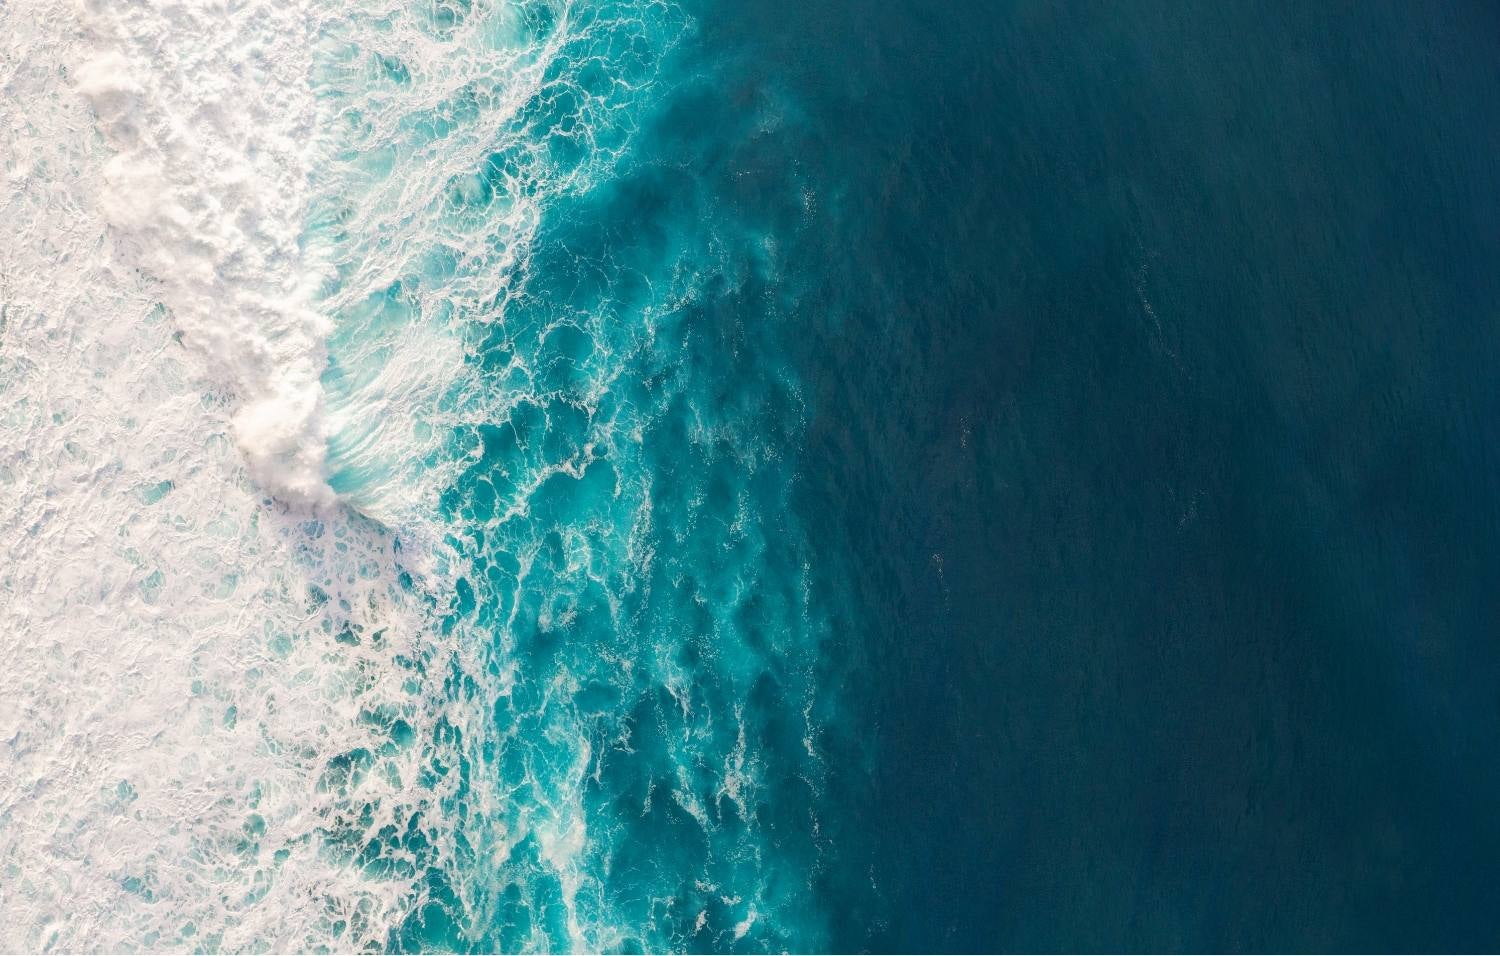 Overhead view of a wave crashing in the ocean